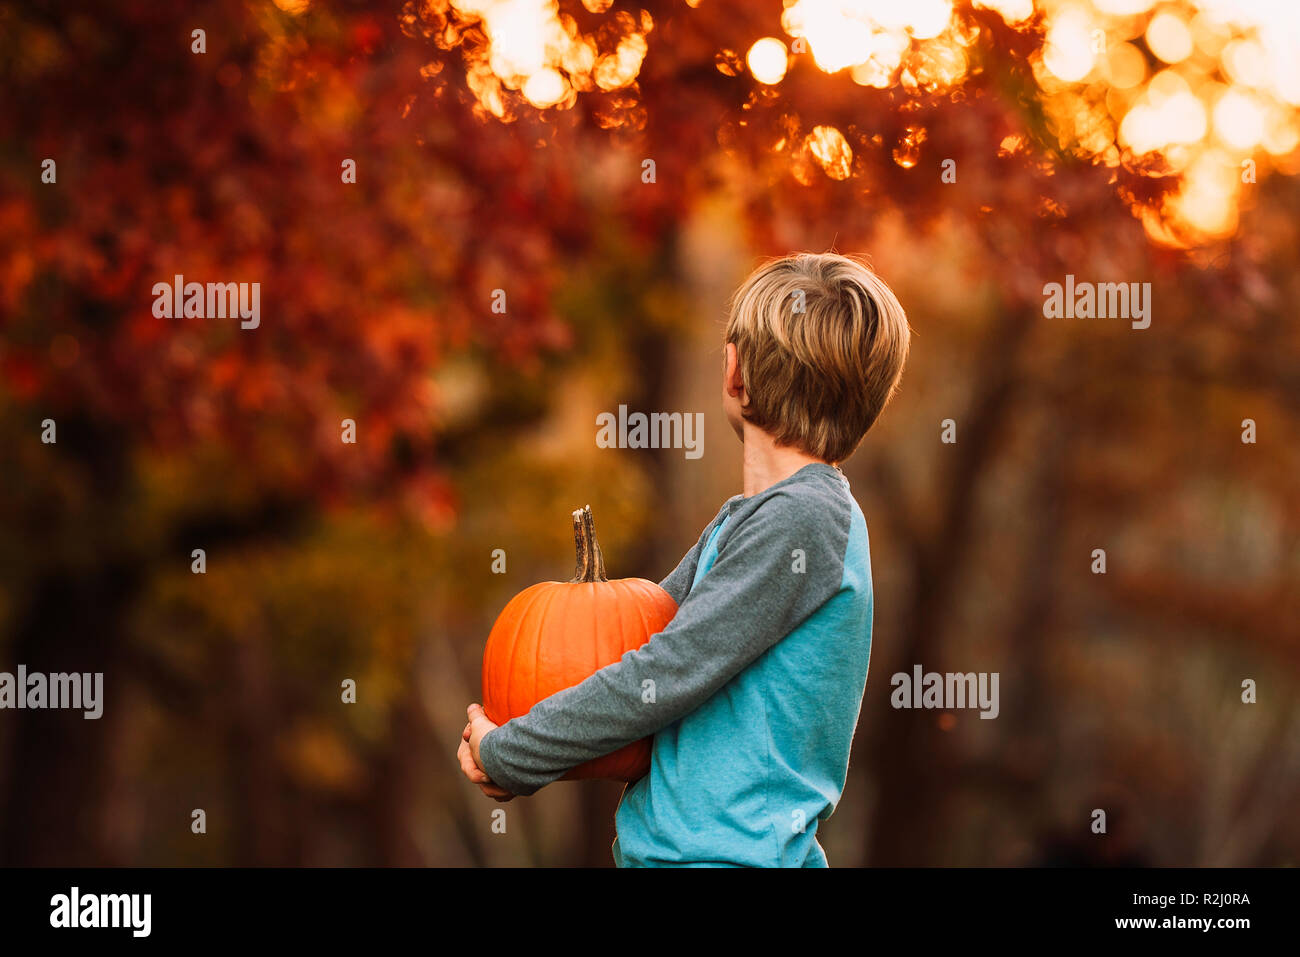 Portrait of a Boy standing in a garden carrying a pumpkin, United States Stock Photo